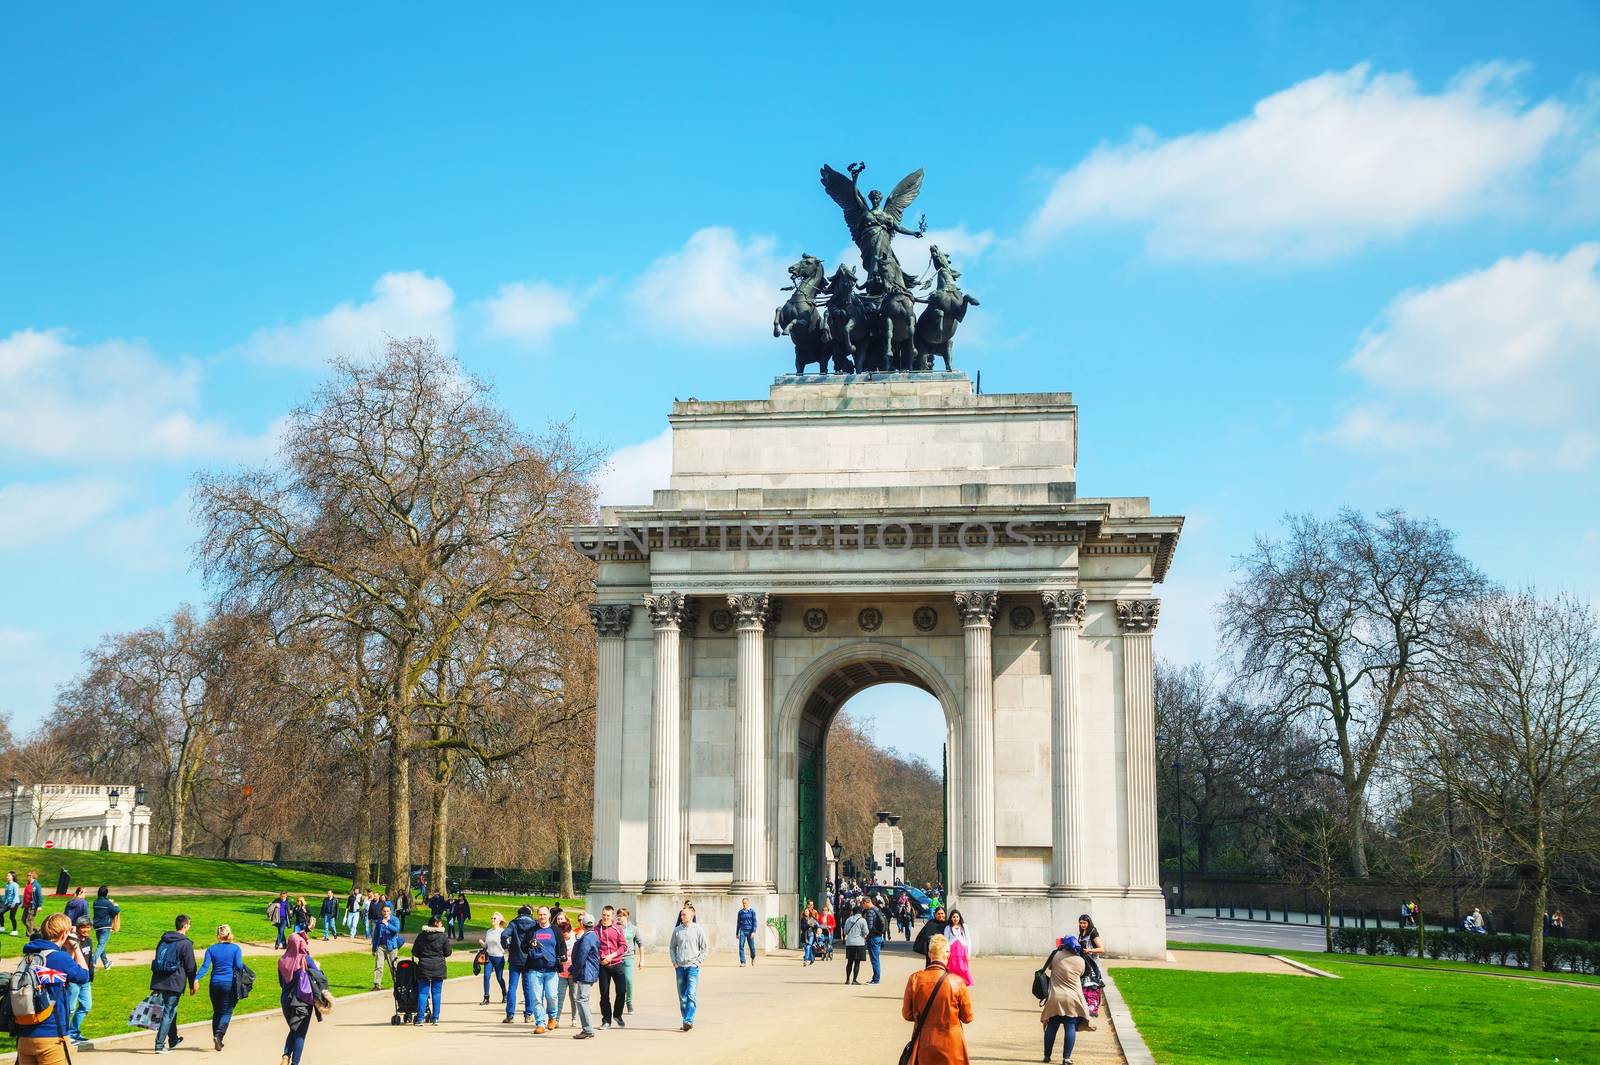 LONDON - APRIL 6: Wellington Arch monument with people on April 6, 2015 in London, UK. It's a triumphal arch located to the south of Hyde Park in central London and at the western corner of Green Park.